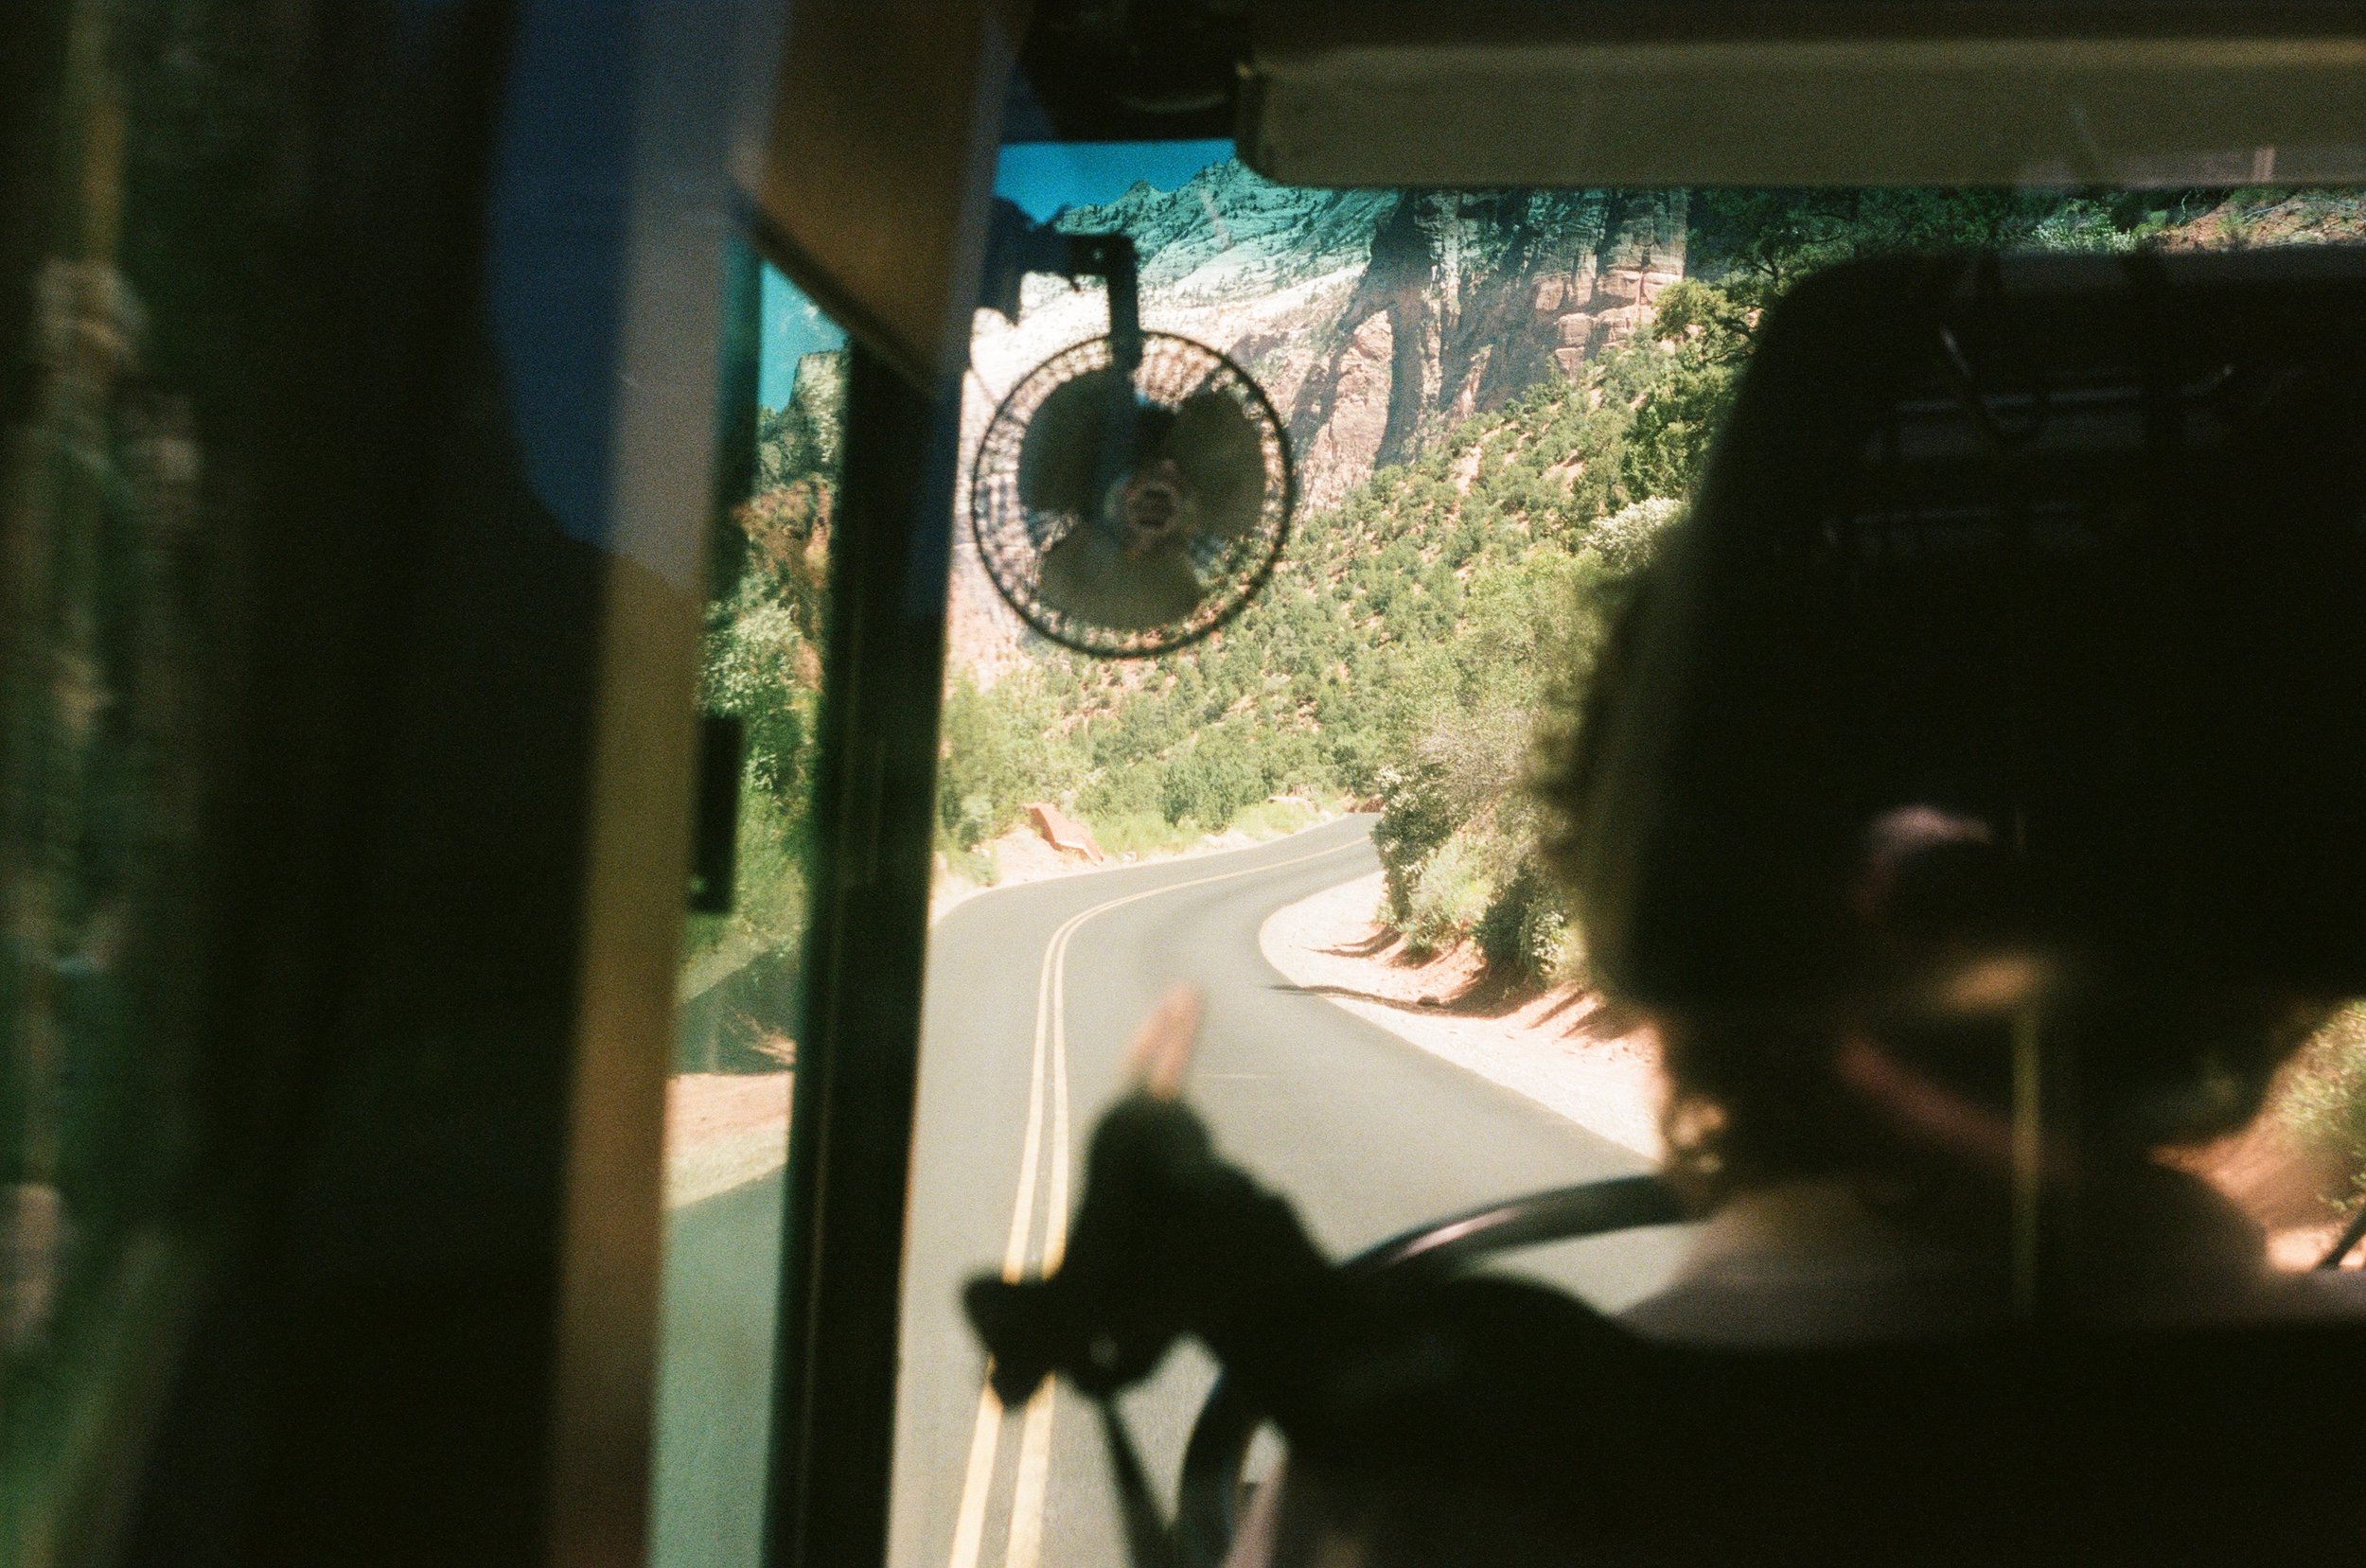  After staying in Zion National Park for a month-long art residency with NPS in 2018, I was lucky enough to be invited back informally two more times, and in 2019 I focused on film photography that felt like being and traveling in the park. I like th